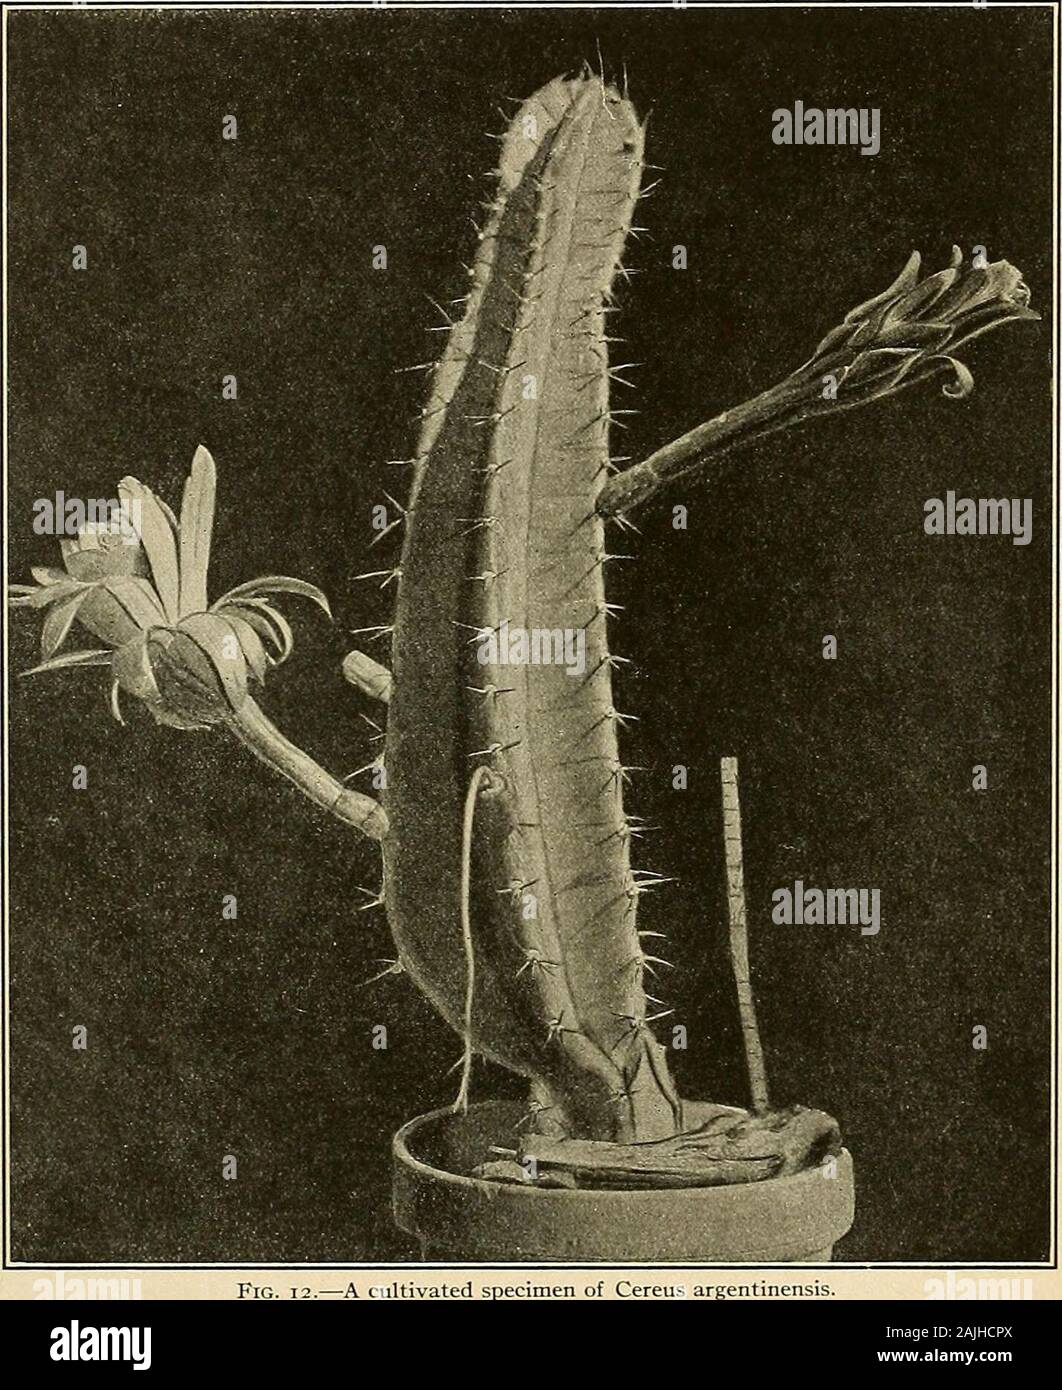 The Cactaceae : descriptions and illustrations of plants of the cactus family . 12 THE CAC11ACEAE. Distribution: Southeastern South America; widely planted in tropical America. Cereus peruvianas tortuosus (Salm-Dyck, Cact. Hort. Dyck. 1844. 30. 1845) andC. peruvianas tortus (Salm-Dyck, Cact. Hort. Dyck. 1849. 46. 1850) are names only. Cereus peruvianas monstrosus is a common garden form first described as a varietyby De Candolle (Prodr. 3:464. 1828). It is similar to the typical form except that theribs are often broken into irregular tubercles or are unevenly sulcate. This has also been. Fig. Stock Photo